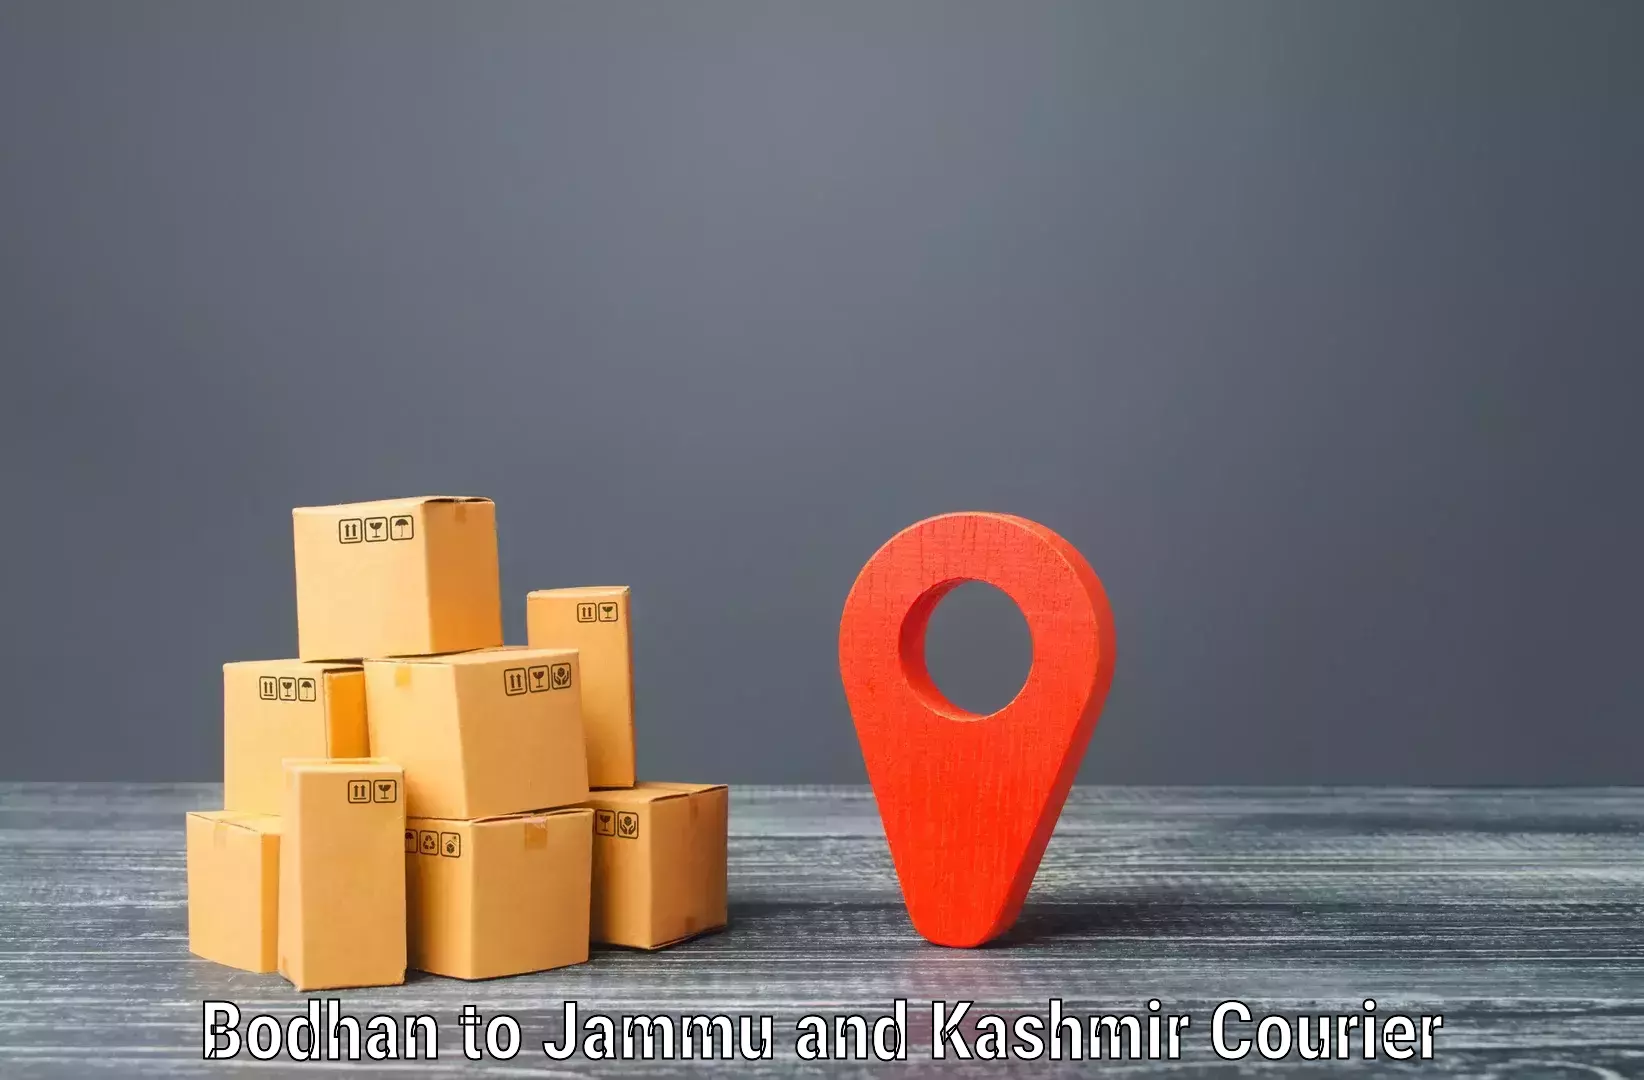 Courier service efficiency Bodhan to Jammu and Kashmir